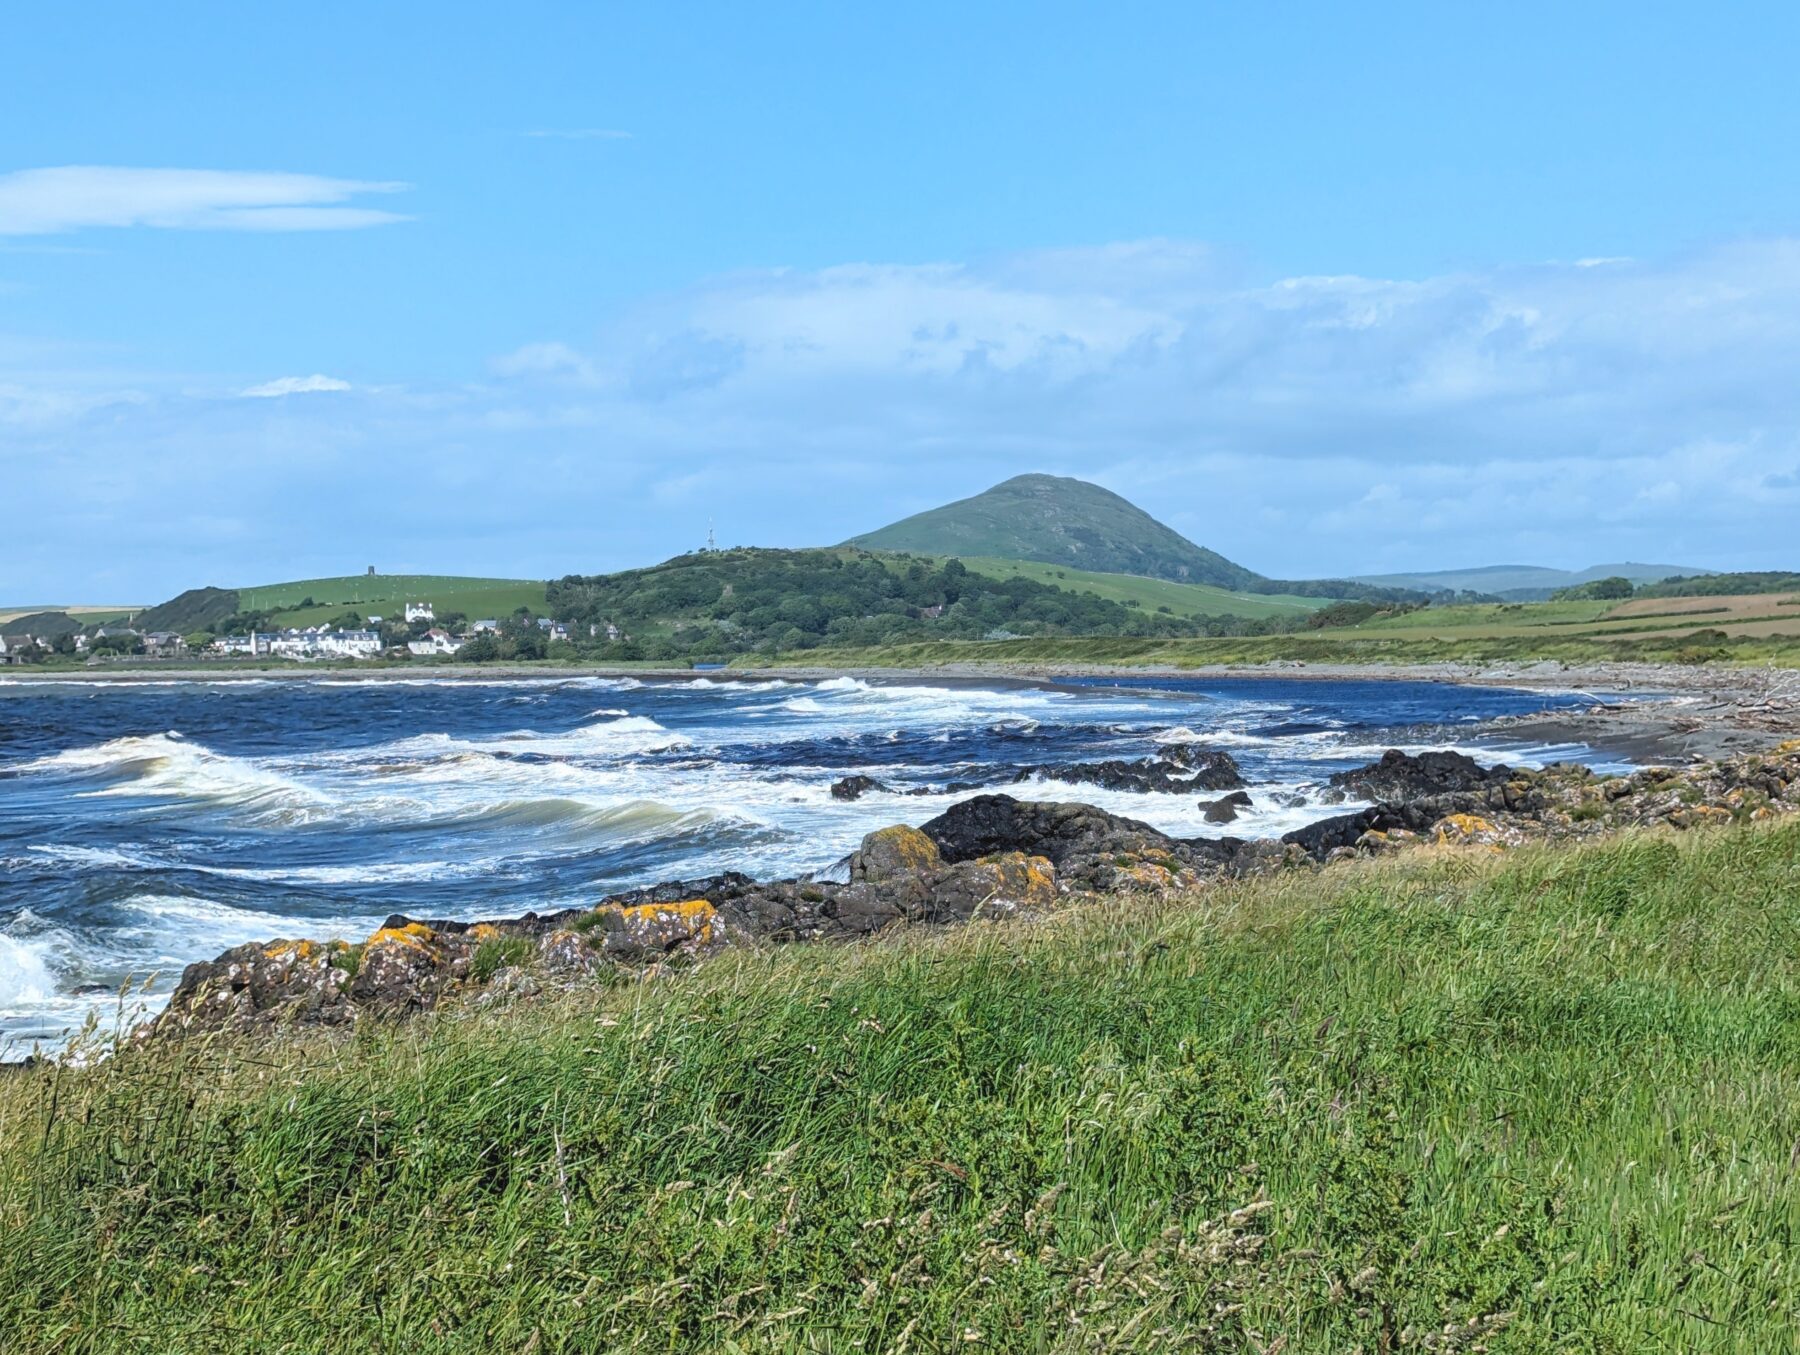 A view across choppy water in Ballantrae Bay,  towards a local hill called Knockdolian